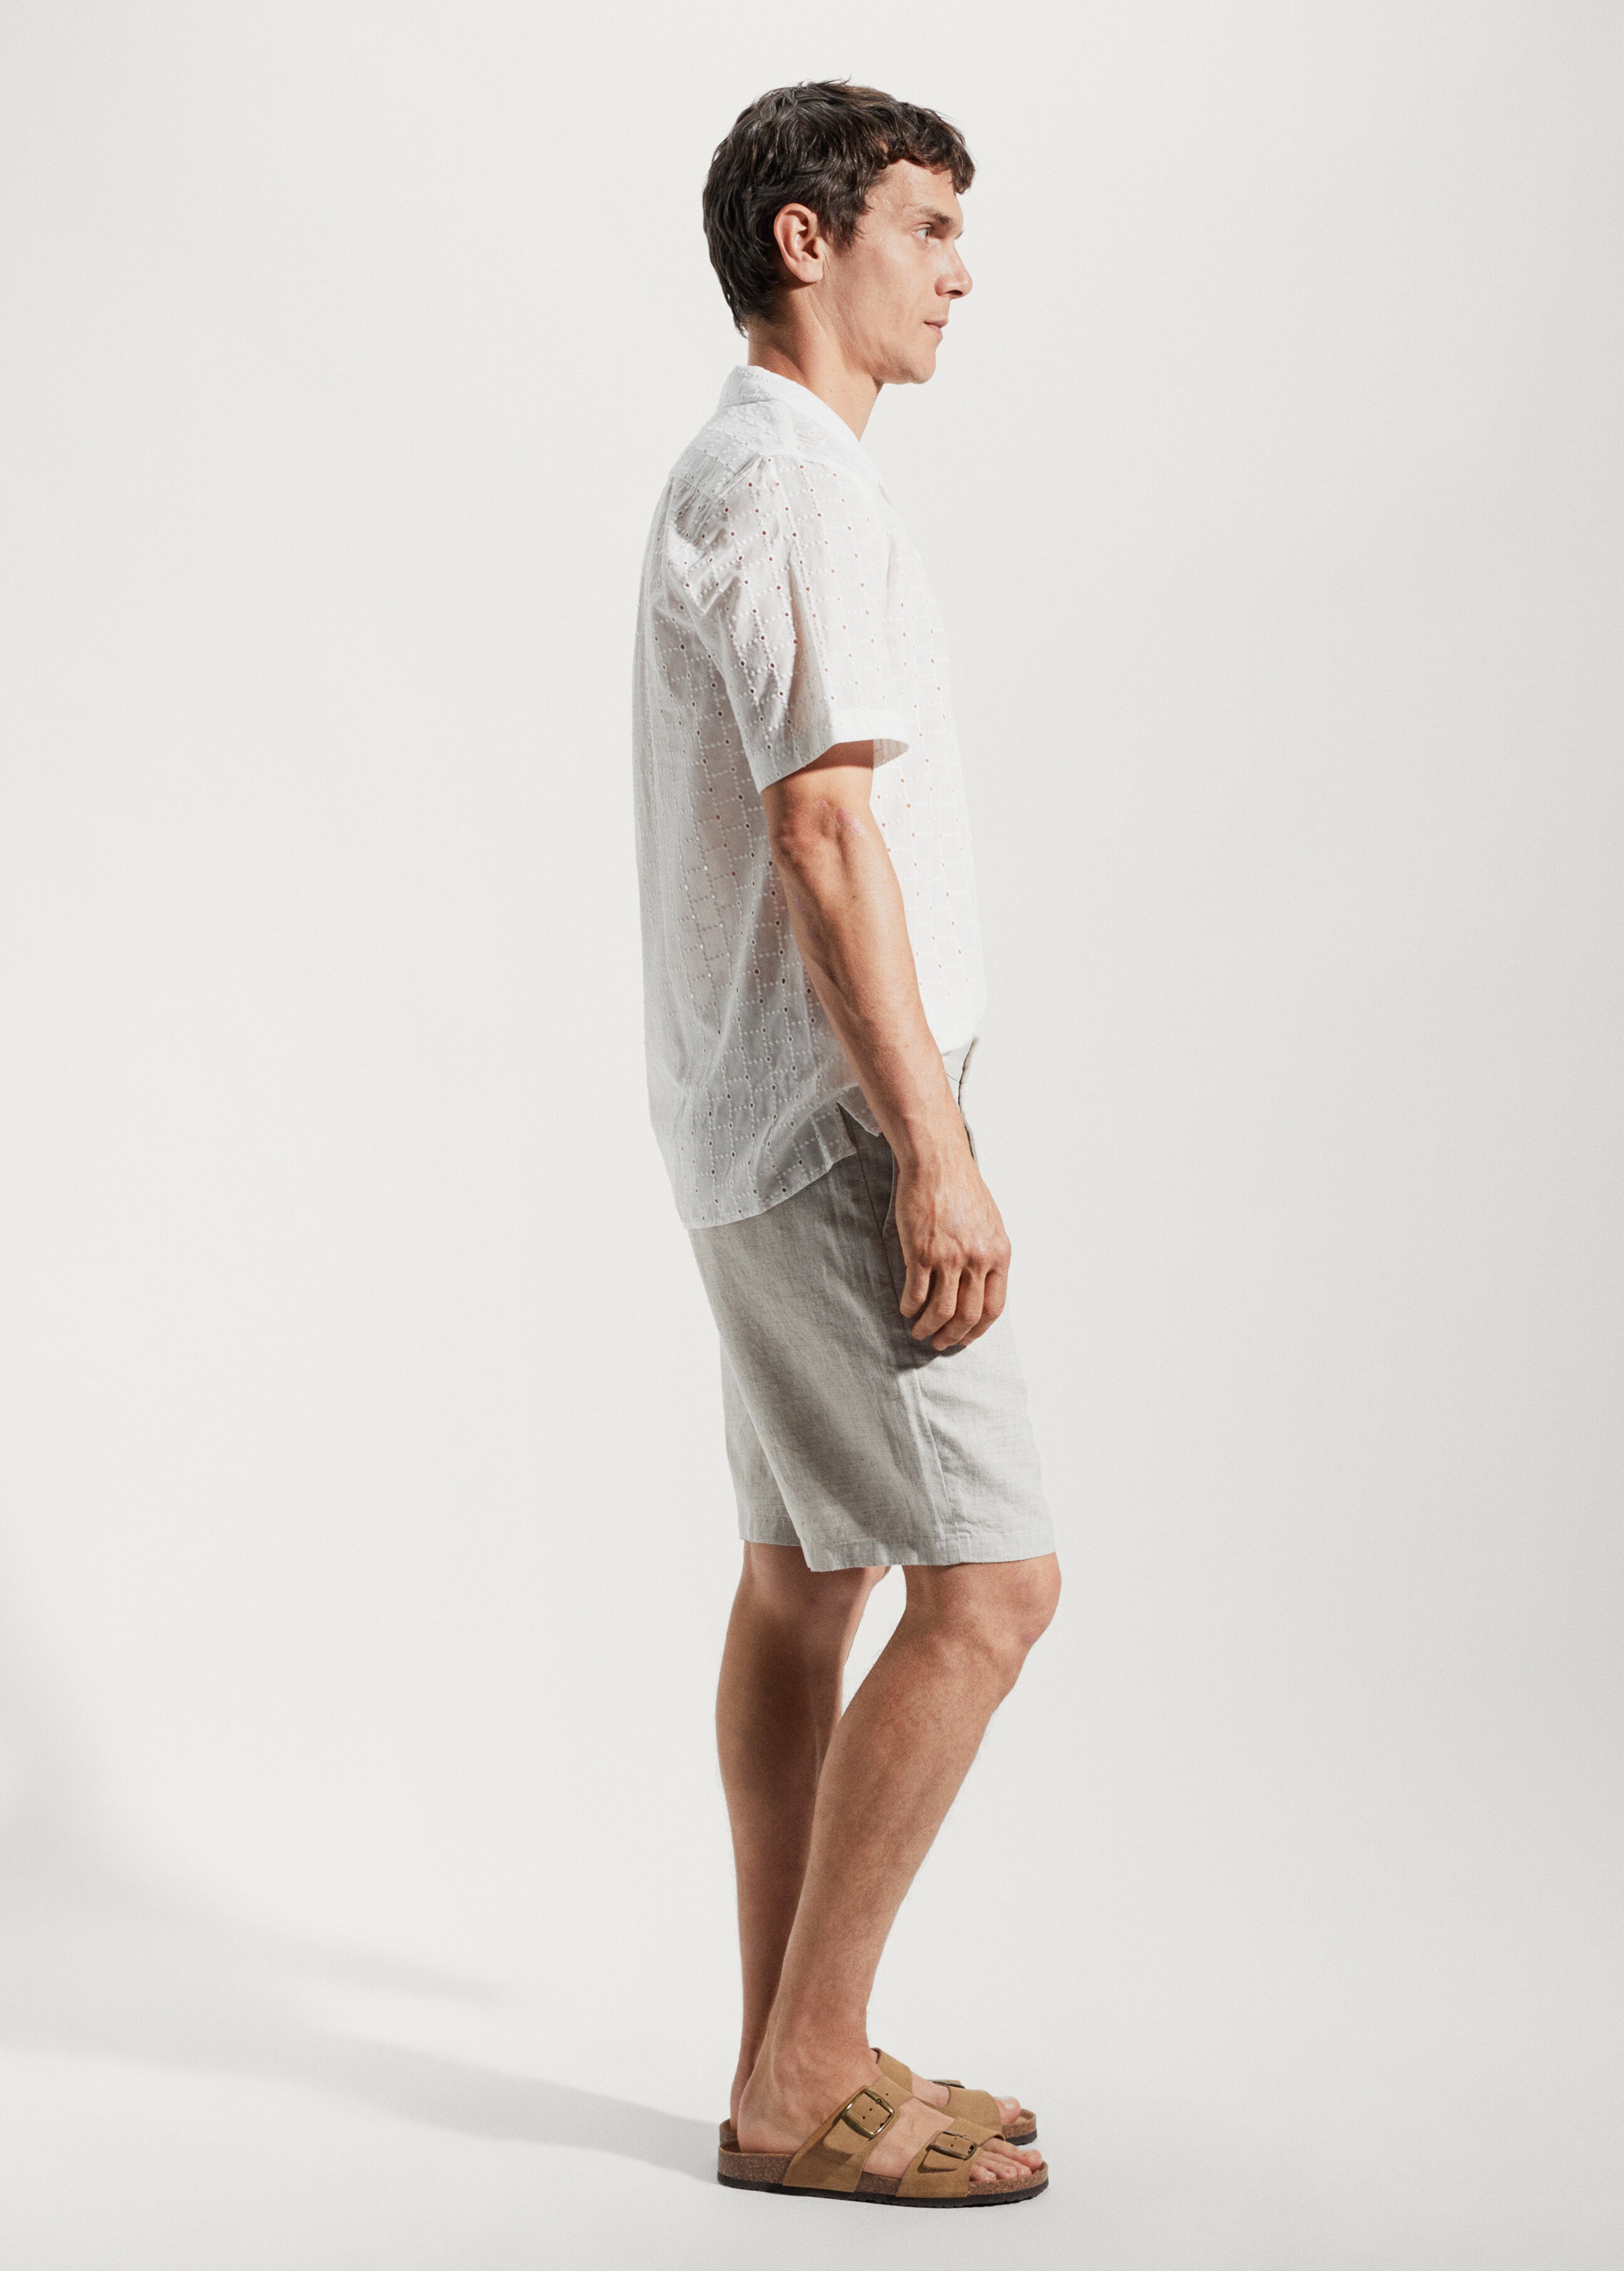 100% linen shorts - Details of the article 2